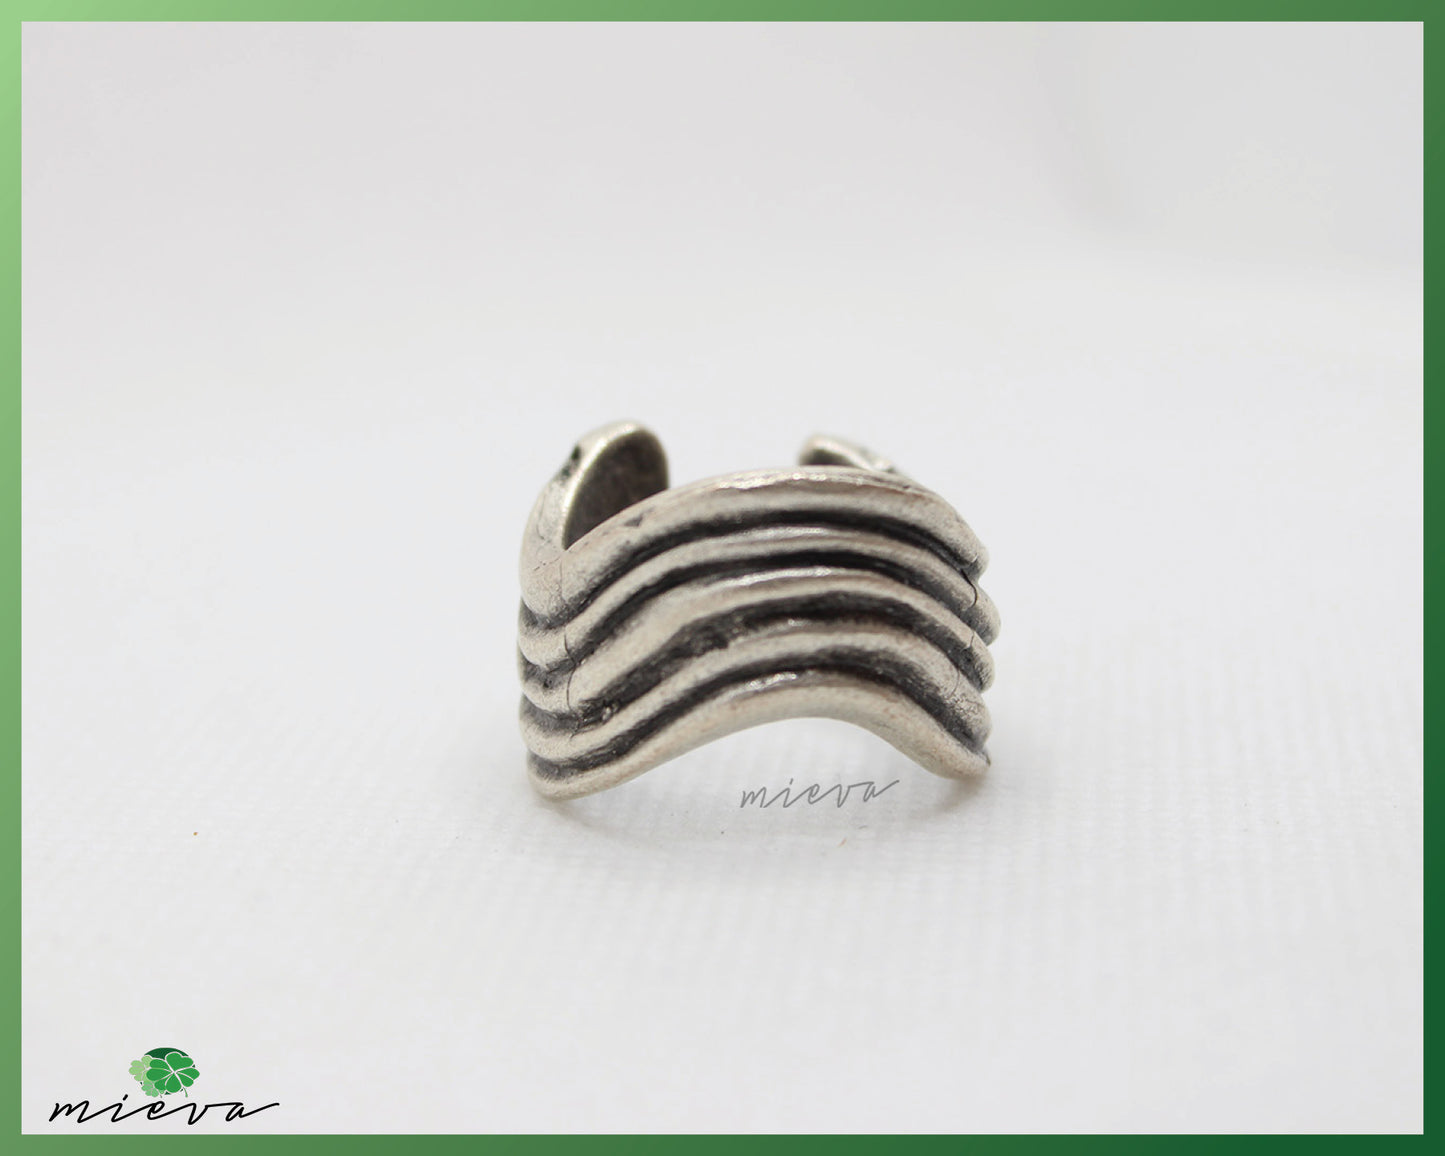 Artisanal Silver Abstract Geometric Ring